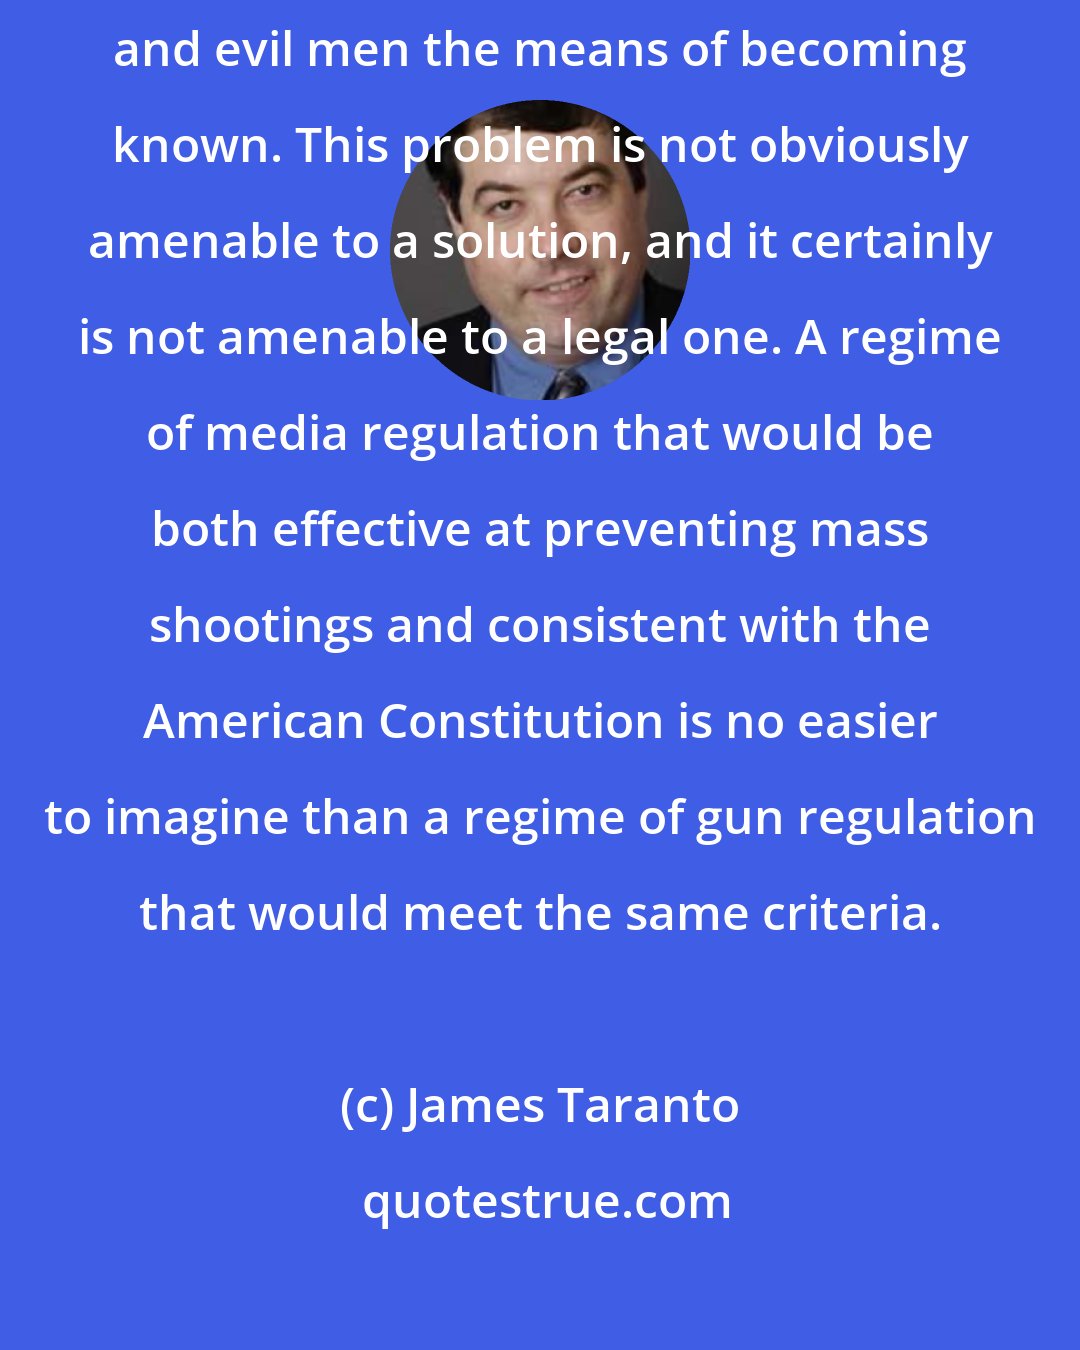 James Taranto: An industry devoted to serving the public's right to know gives twisted and evil men the means of becoming known. This problem is not obviously amenable to a solution, and it certainly is not amenable to a legal one. A regime of media regulation that would be both effective at preventing mass shootings and consistent with the American Constitution is no easier to imagine than a regime of gun regulation that would meet the same criteria.